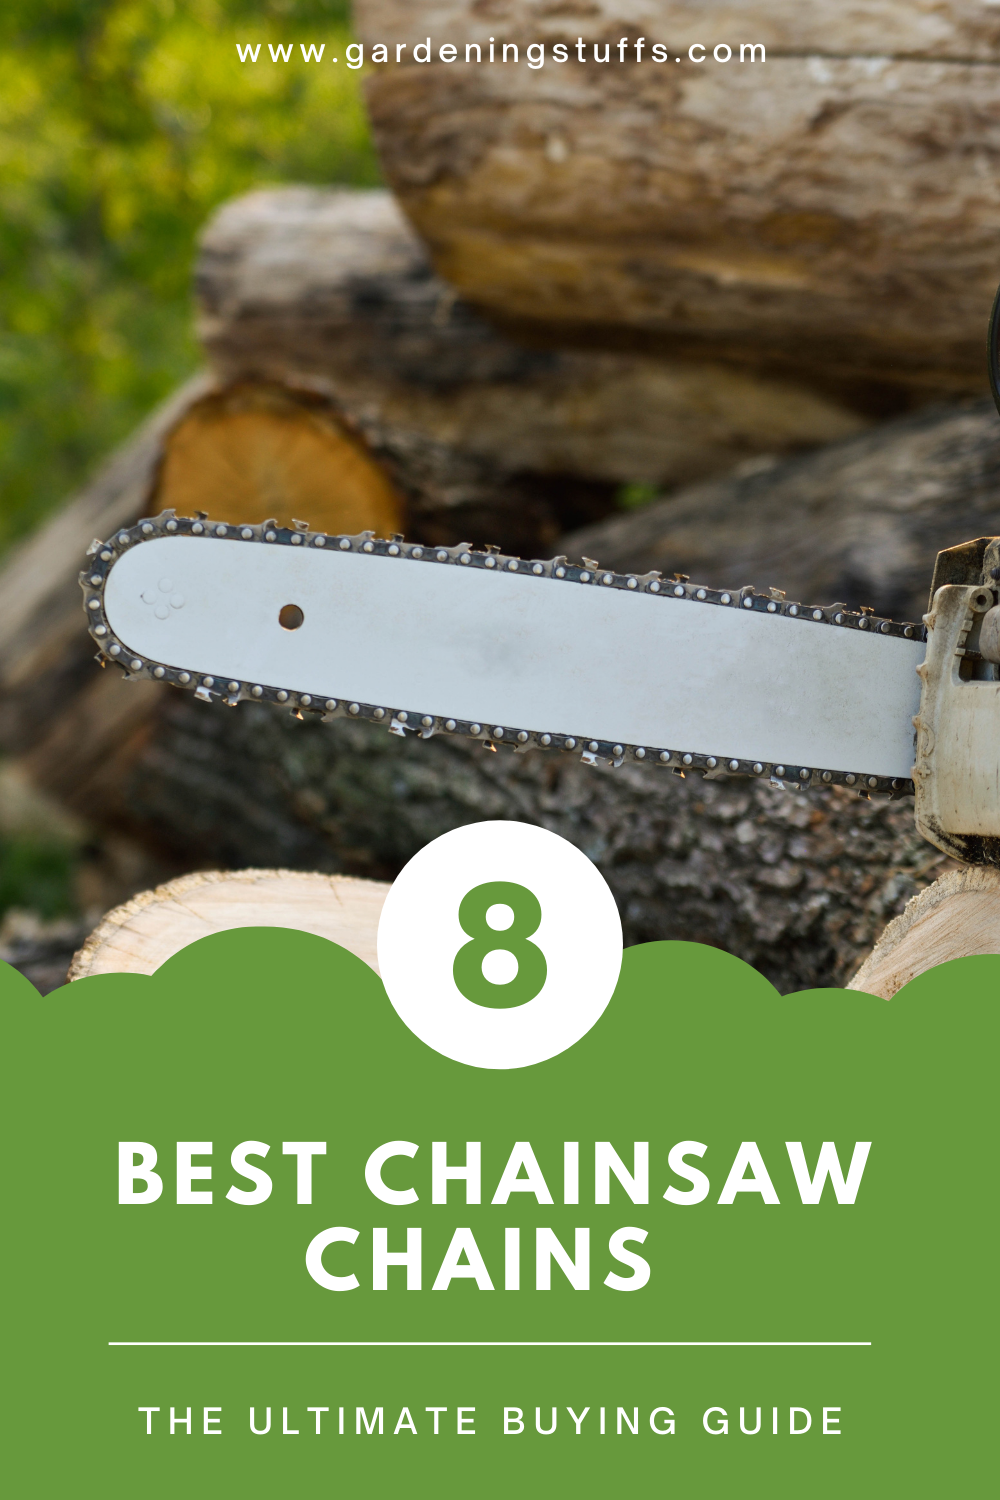 Looking for the best chainsaw chains for your craft projects? In this guide, we’ll discuss the types of chain saw chains available, how to pick one based on your needs and then review the best available so you can get the best chainsaw chain.